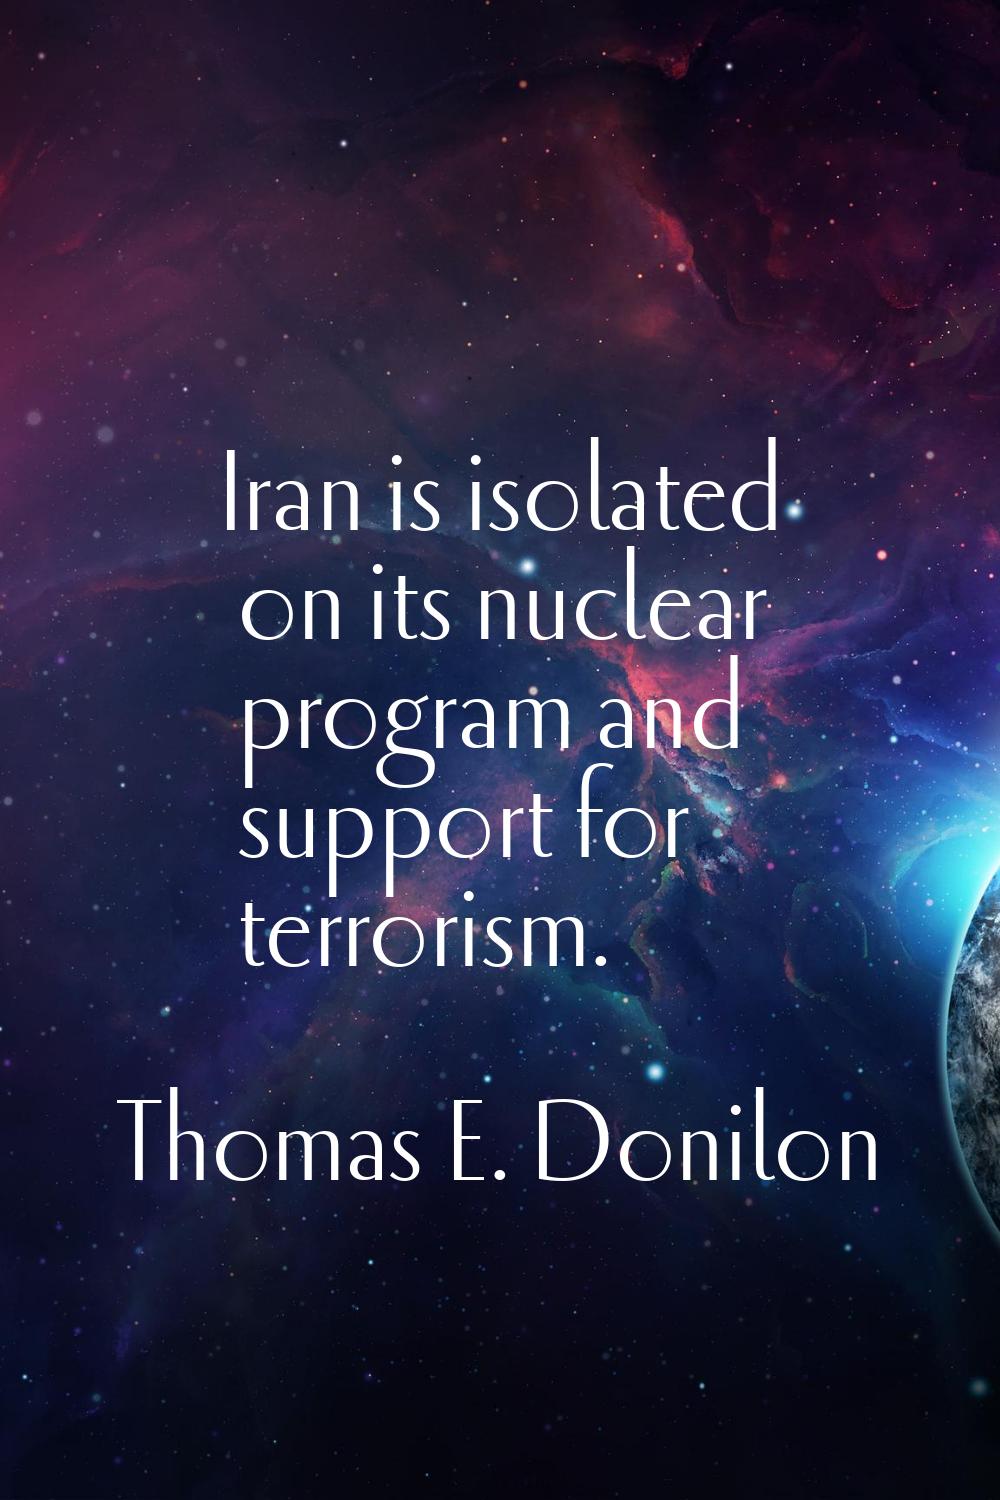 Iran is isolated on its nuclear program and support for terrorism.